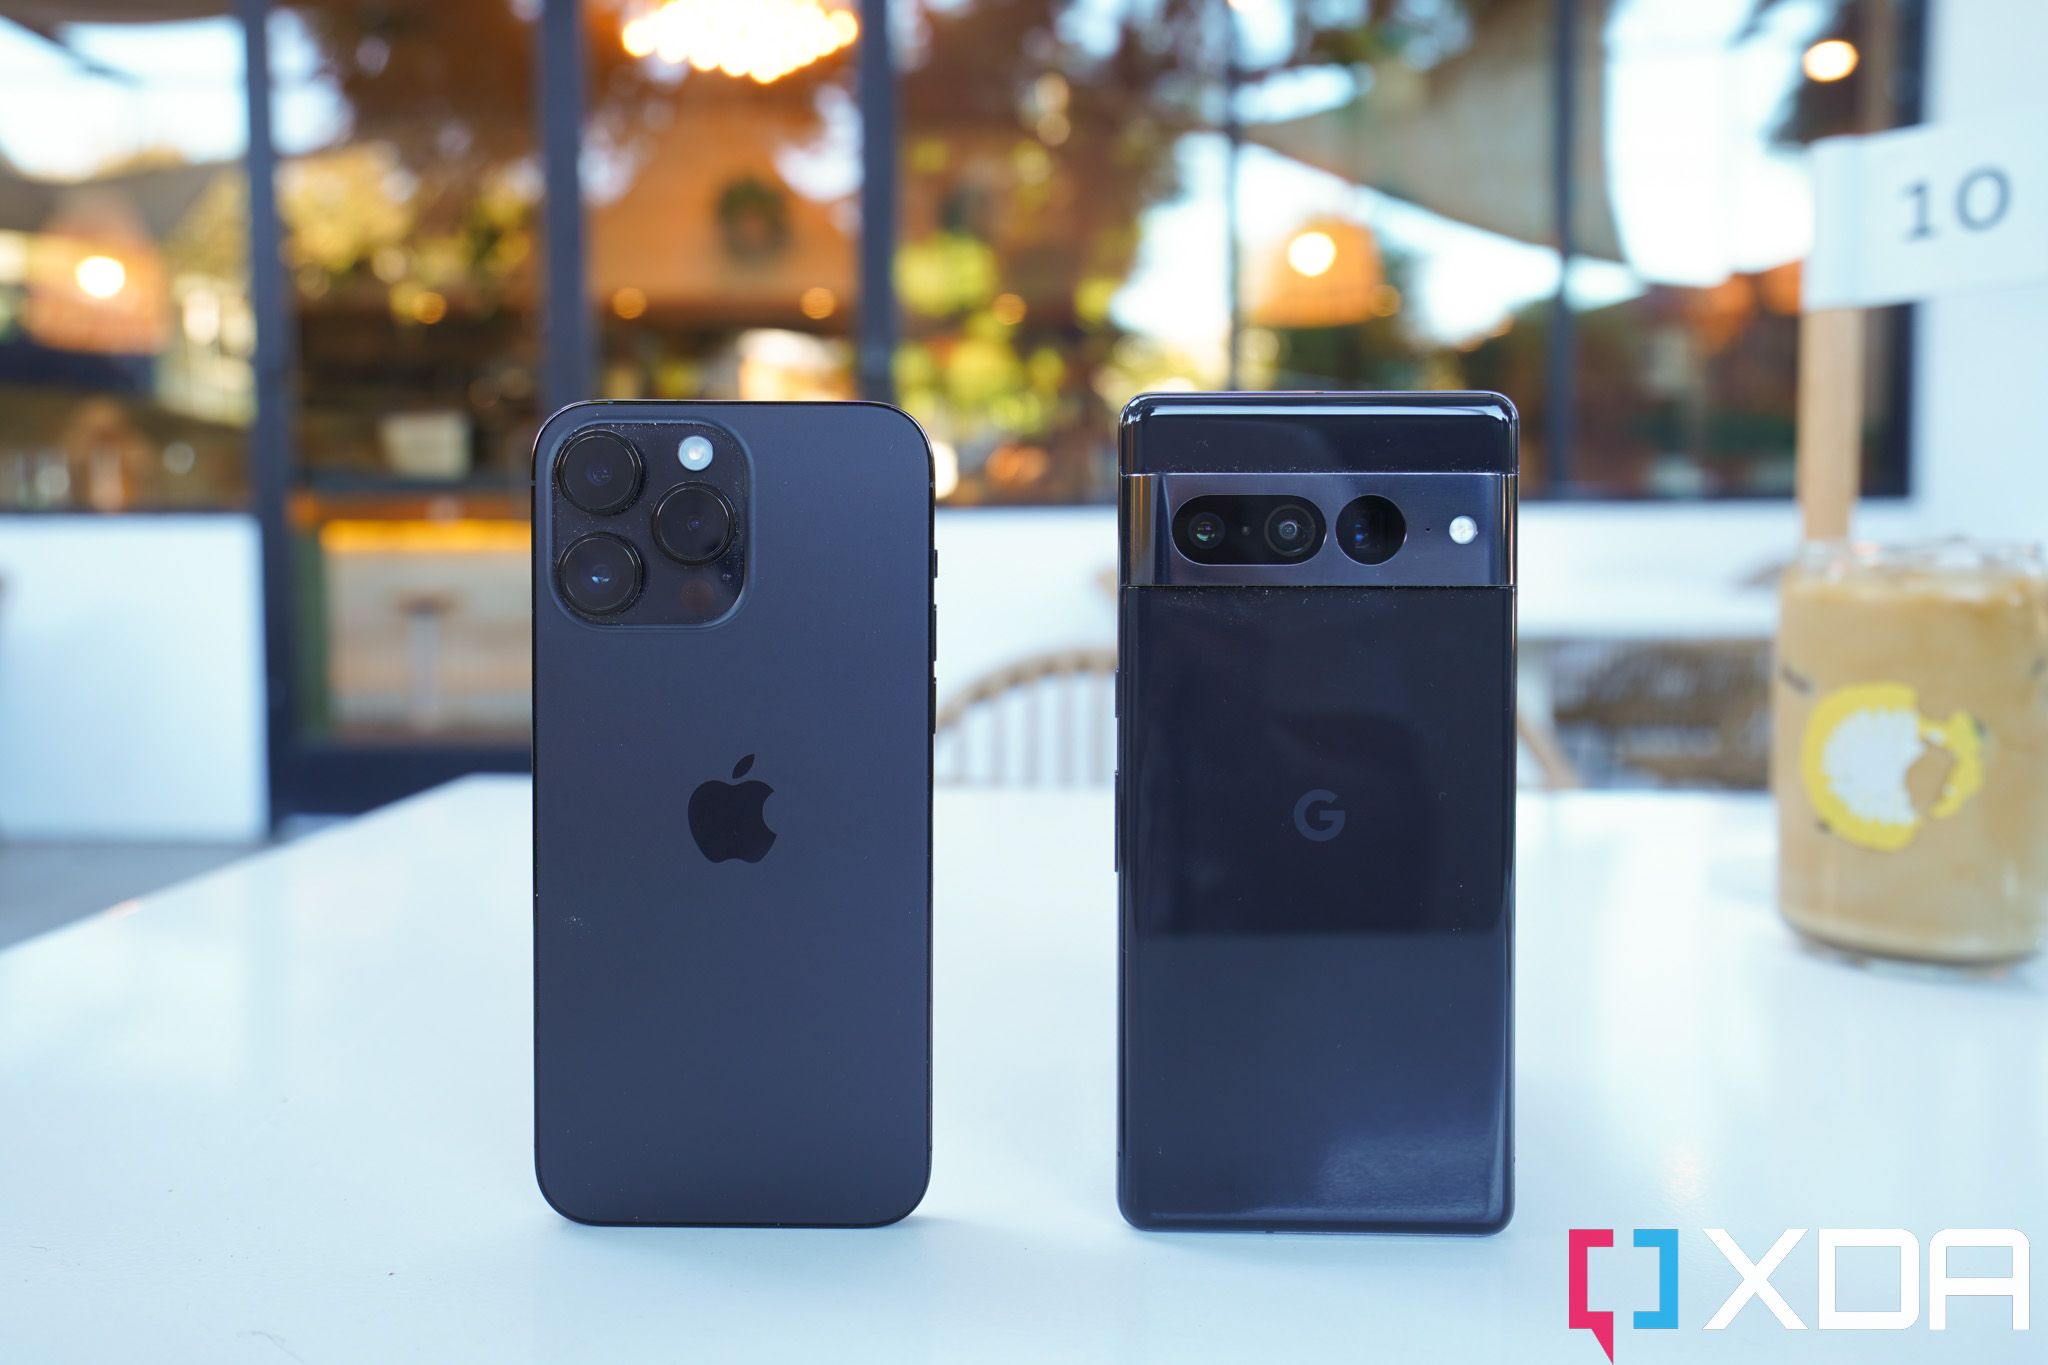 Google Pixel 7 Pro vs iPhone 14 Pro Max: Which flagship should you buy?